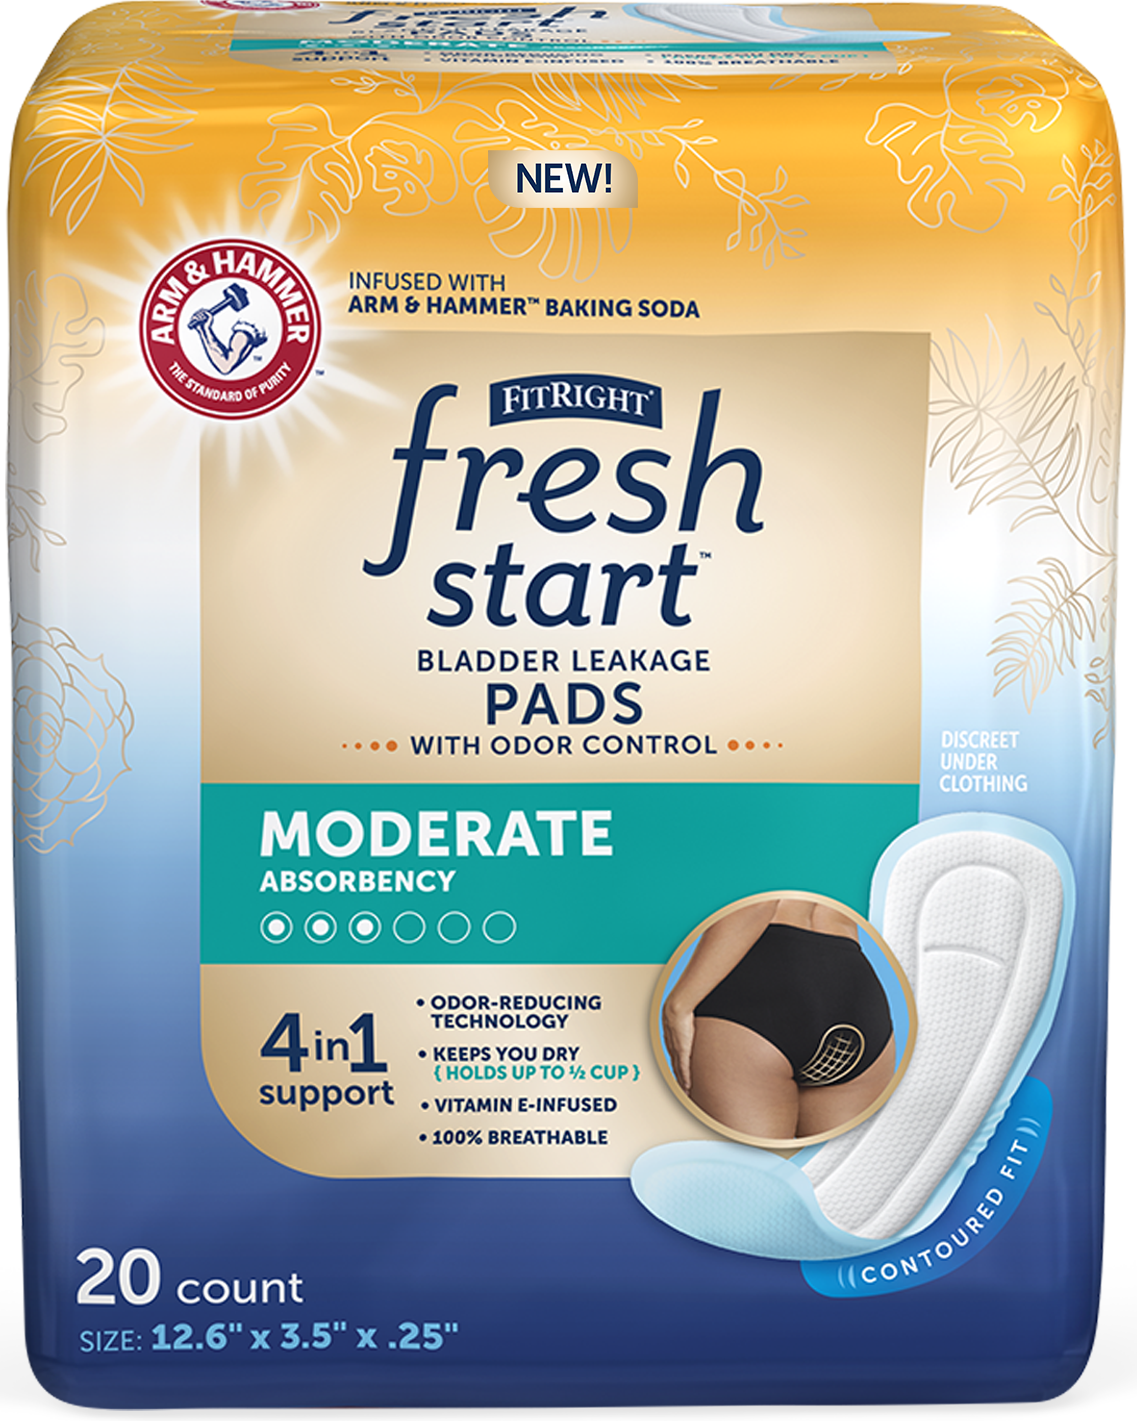 Packaging for moderate absorbency pads. Features an image of the pads and a description of the product and its features.